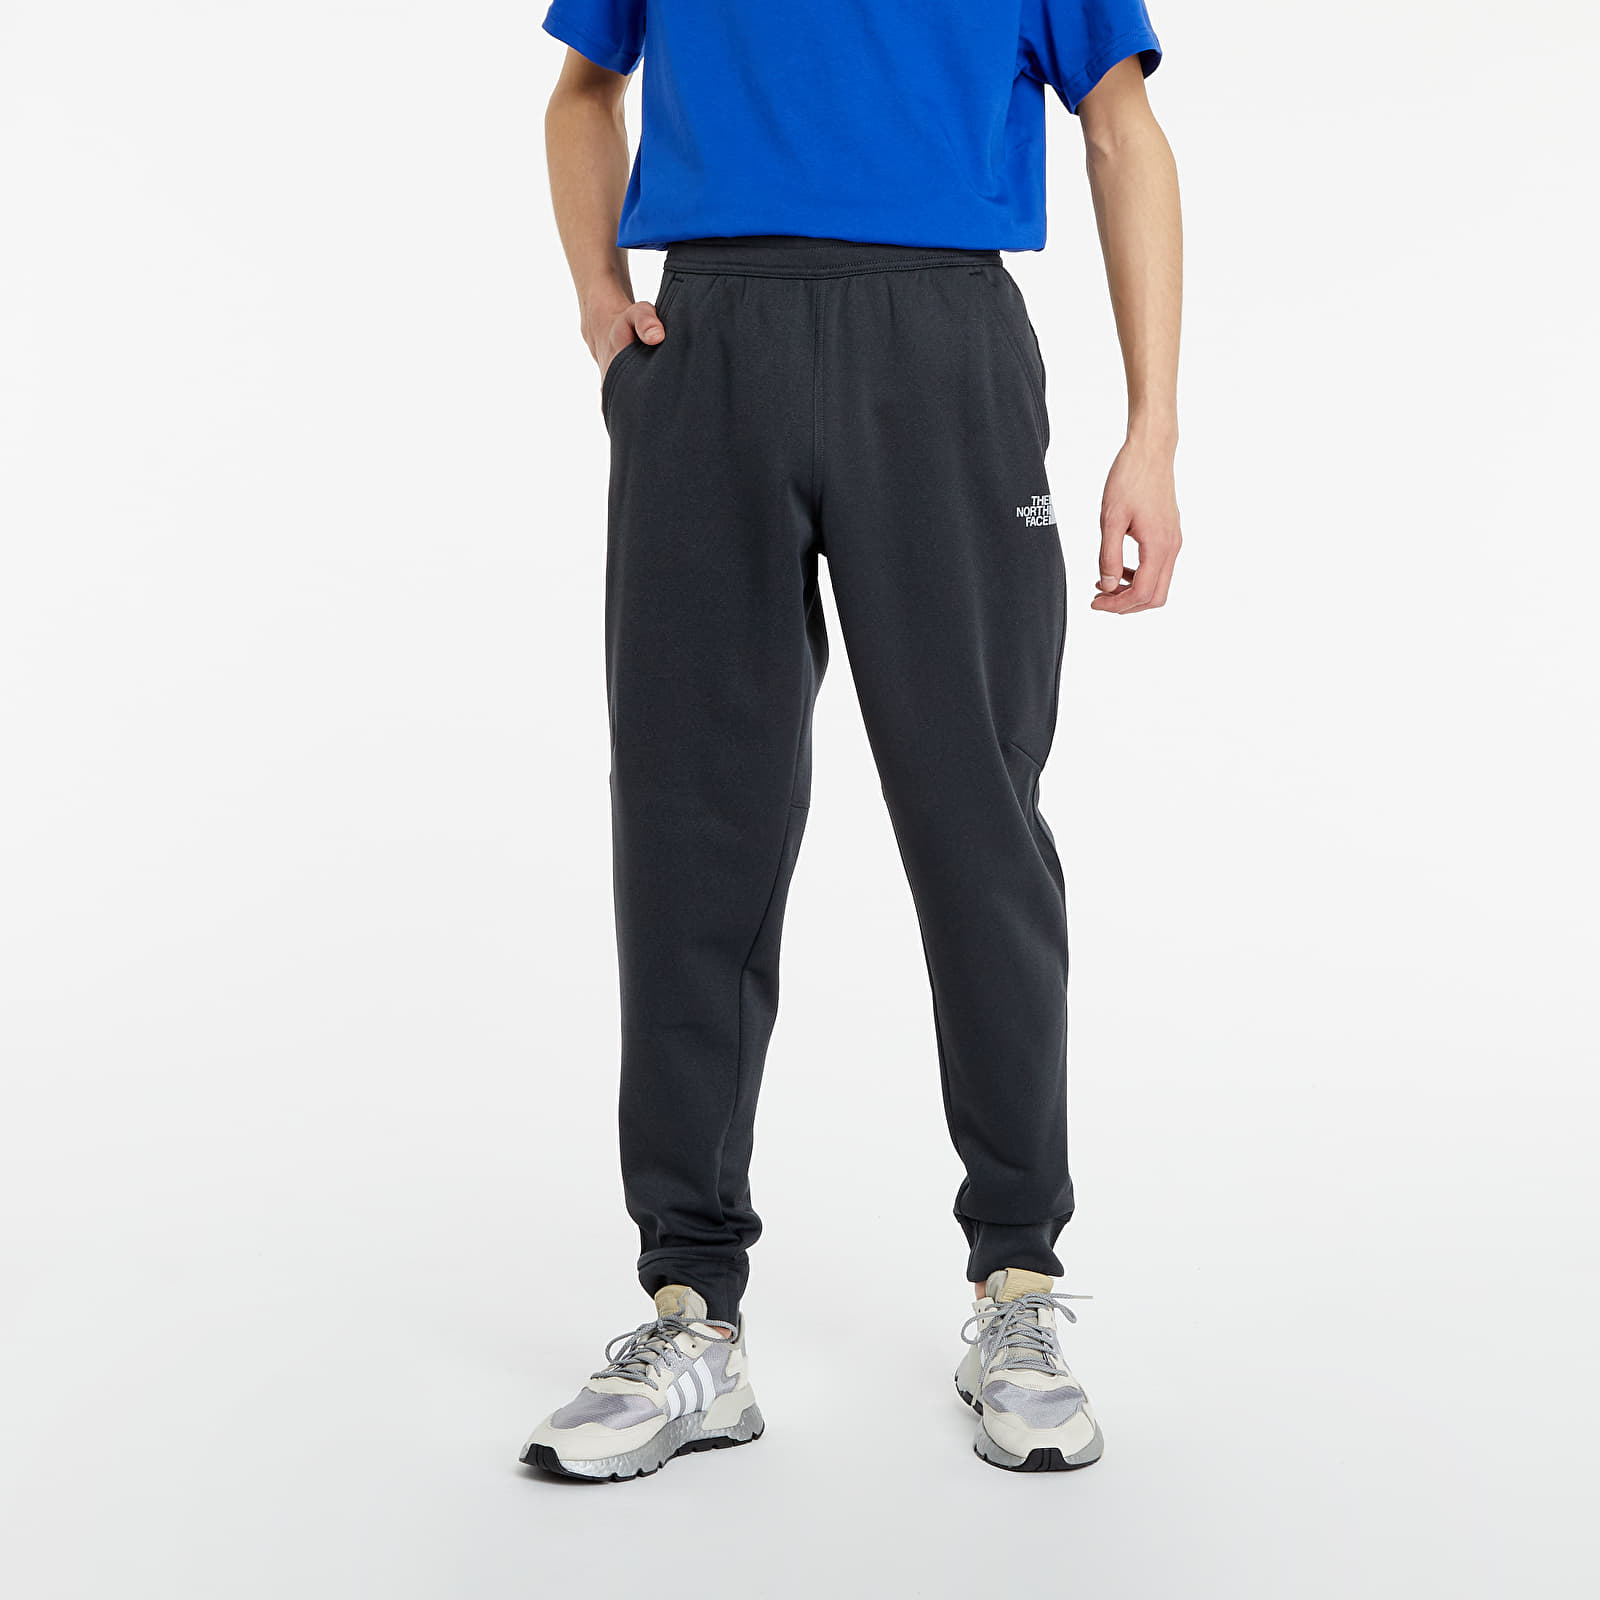 The North Face Surgent Pant - Men's - Clothing